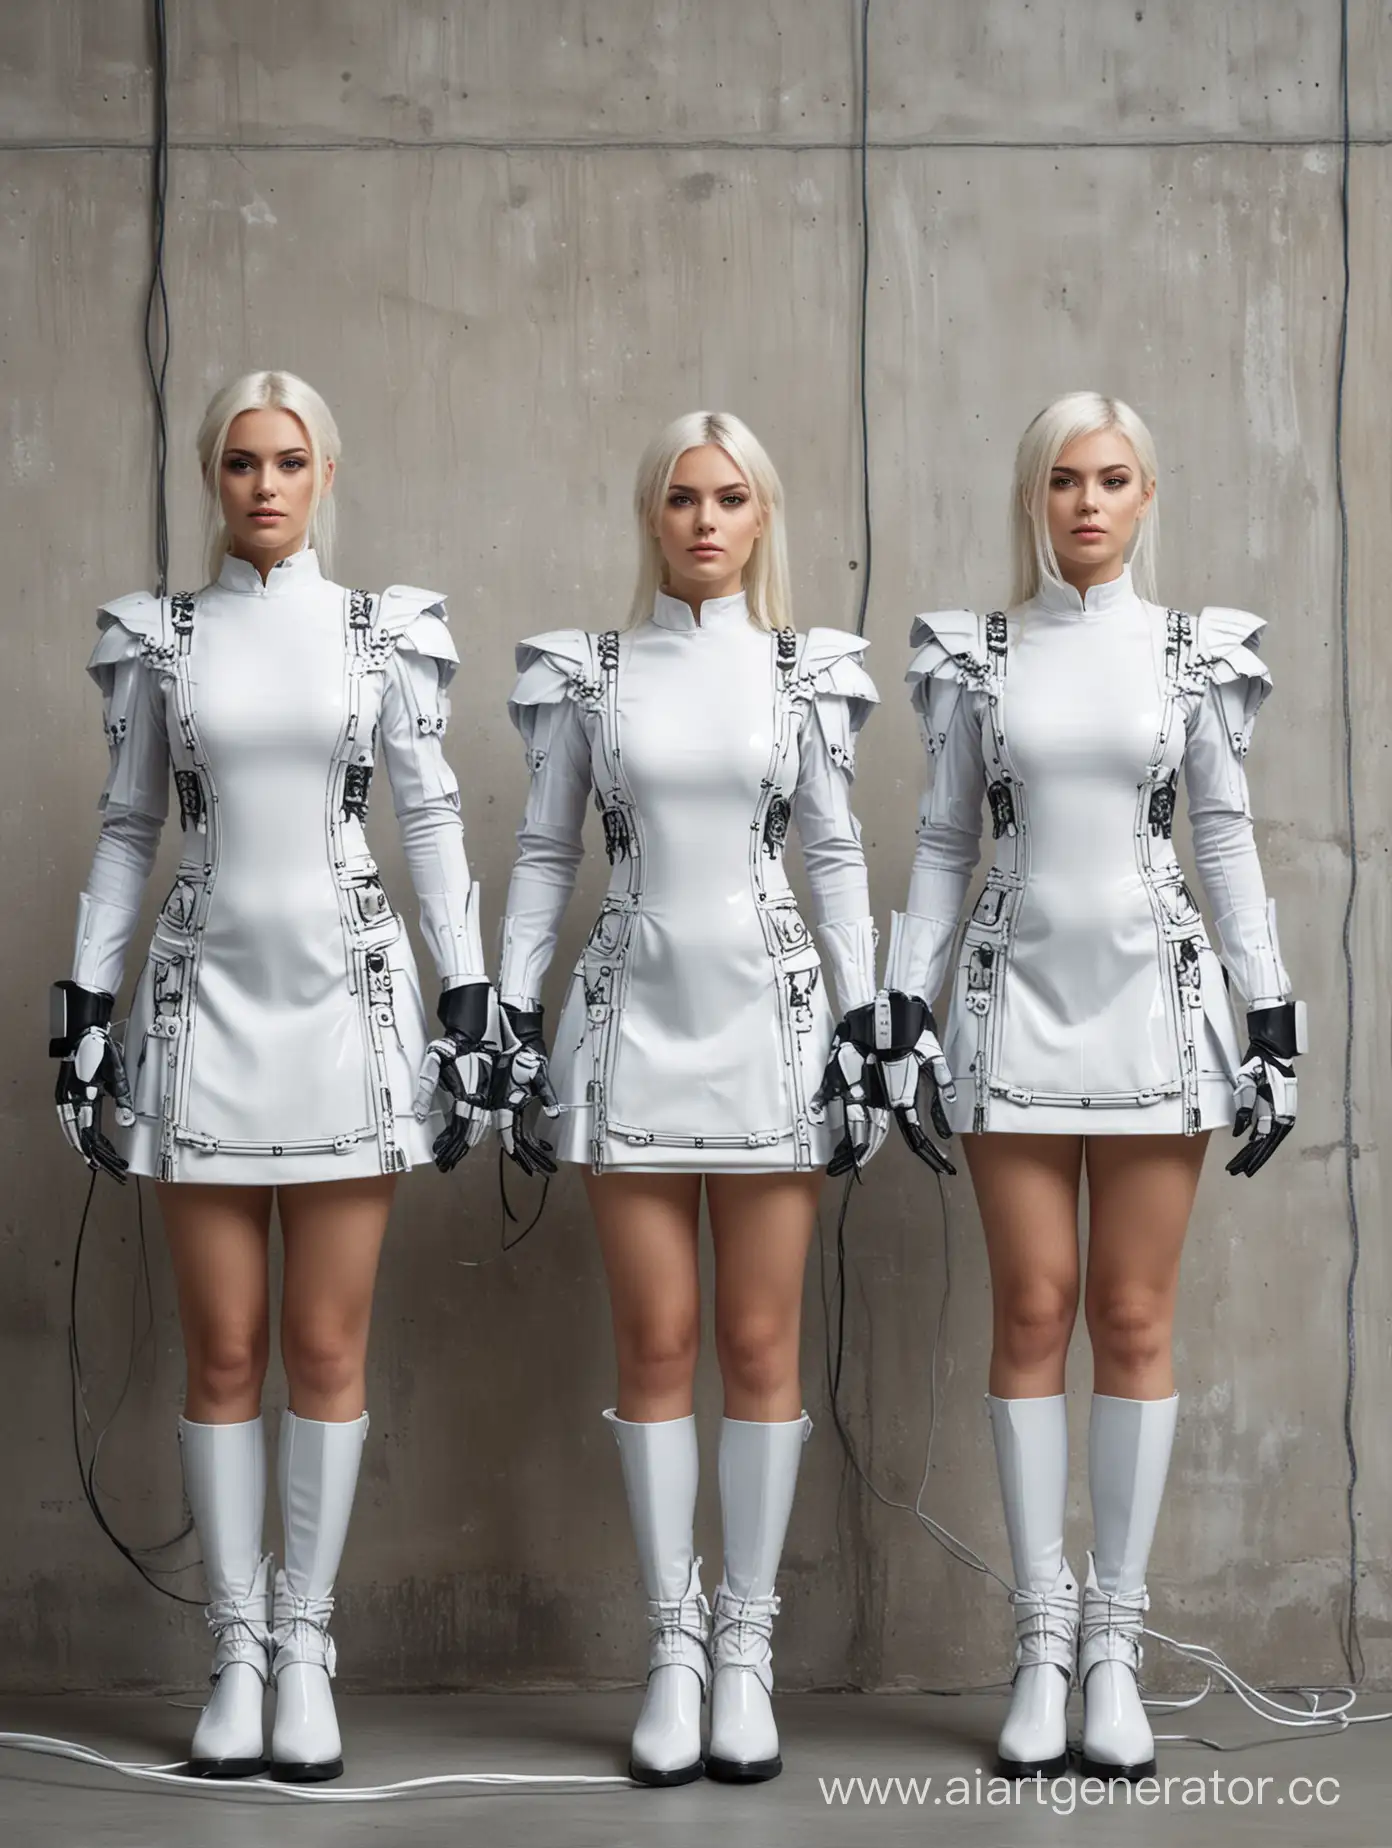 Three identical white European Female cyborgs, sexy maid outfit, standing at attention against a wall and charging, exposed wires and circuits